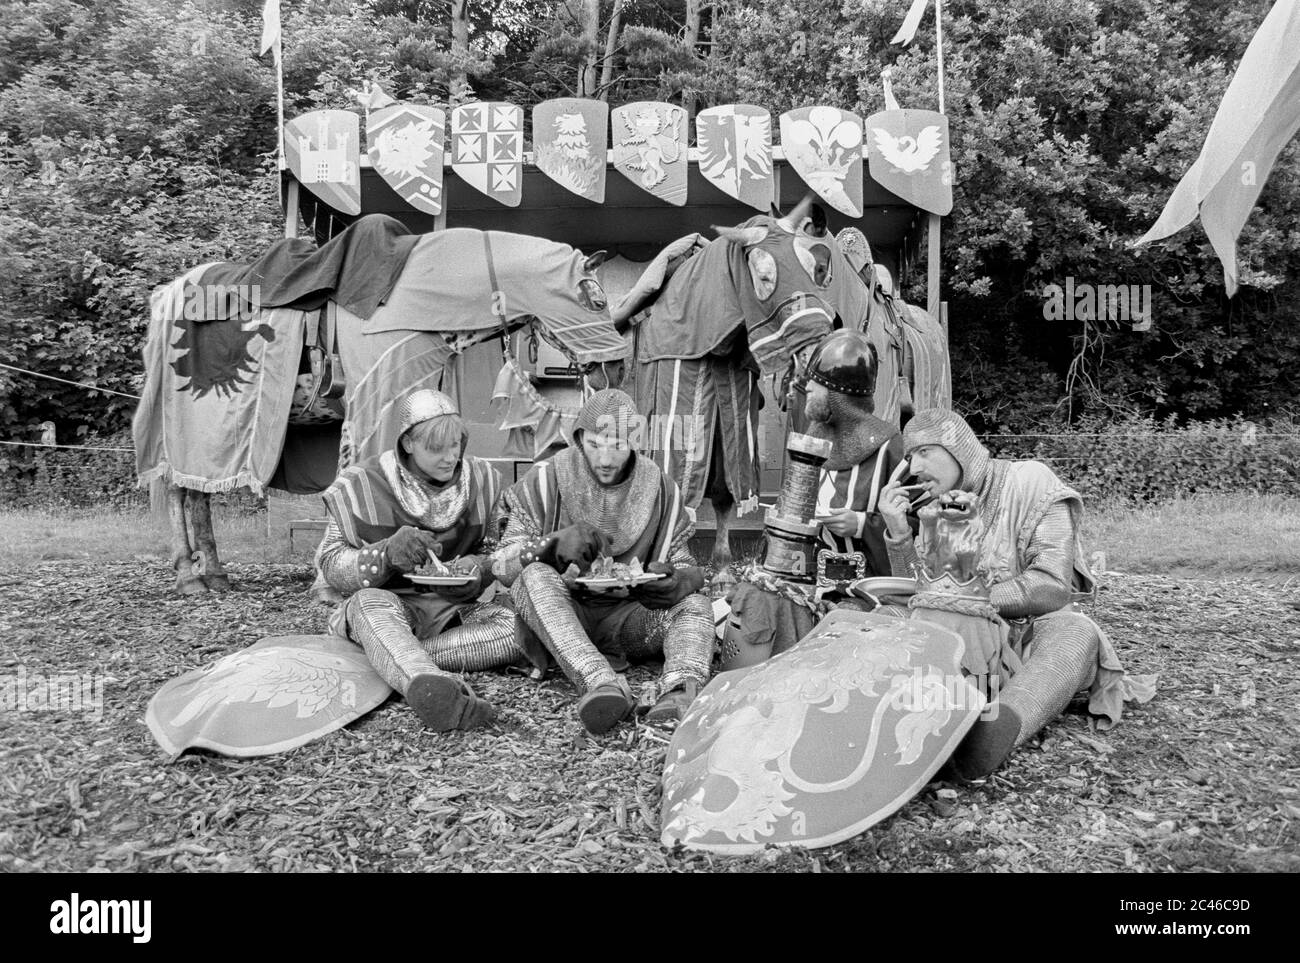 Time for lunch - historical re-enactment group take a break from a jousting competition at Breamore House in Hampshire UK. Circa 1992. Stock Photo